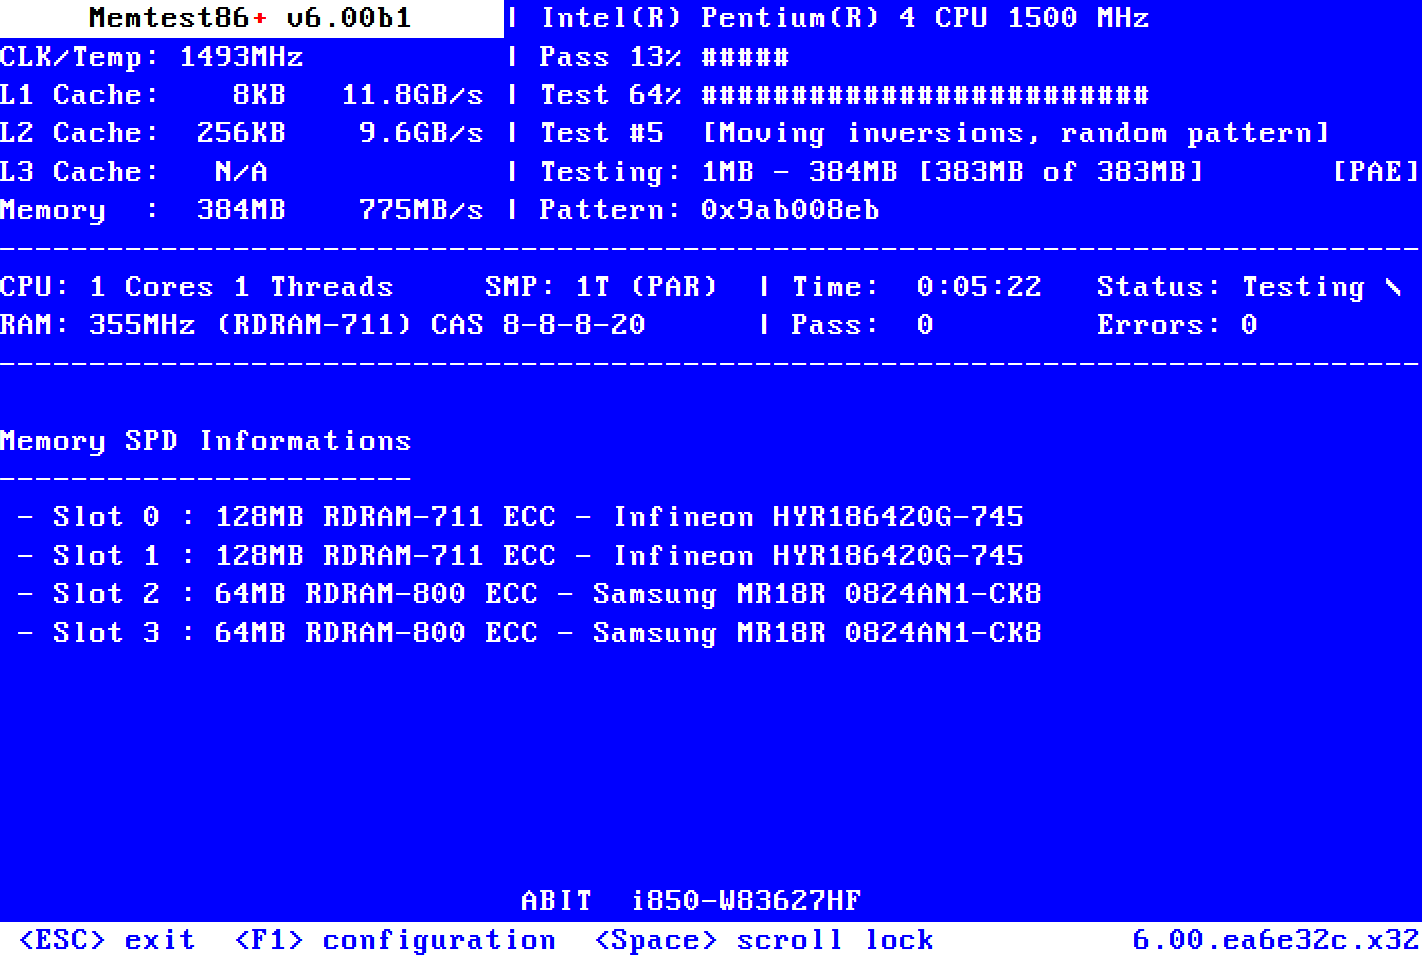 Media asset in full size related to 3dfxzone.it news item entitled as follows: Free RAM Testing & Diagnostics Utilities: Memtest86+ 6.00 - DDR5 Ready | Image Name: news33796_Memtest86plus_Screenshot_1.png